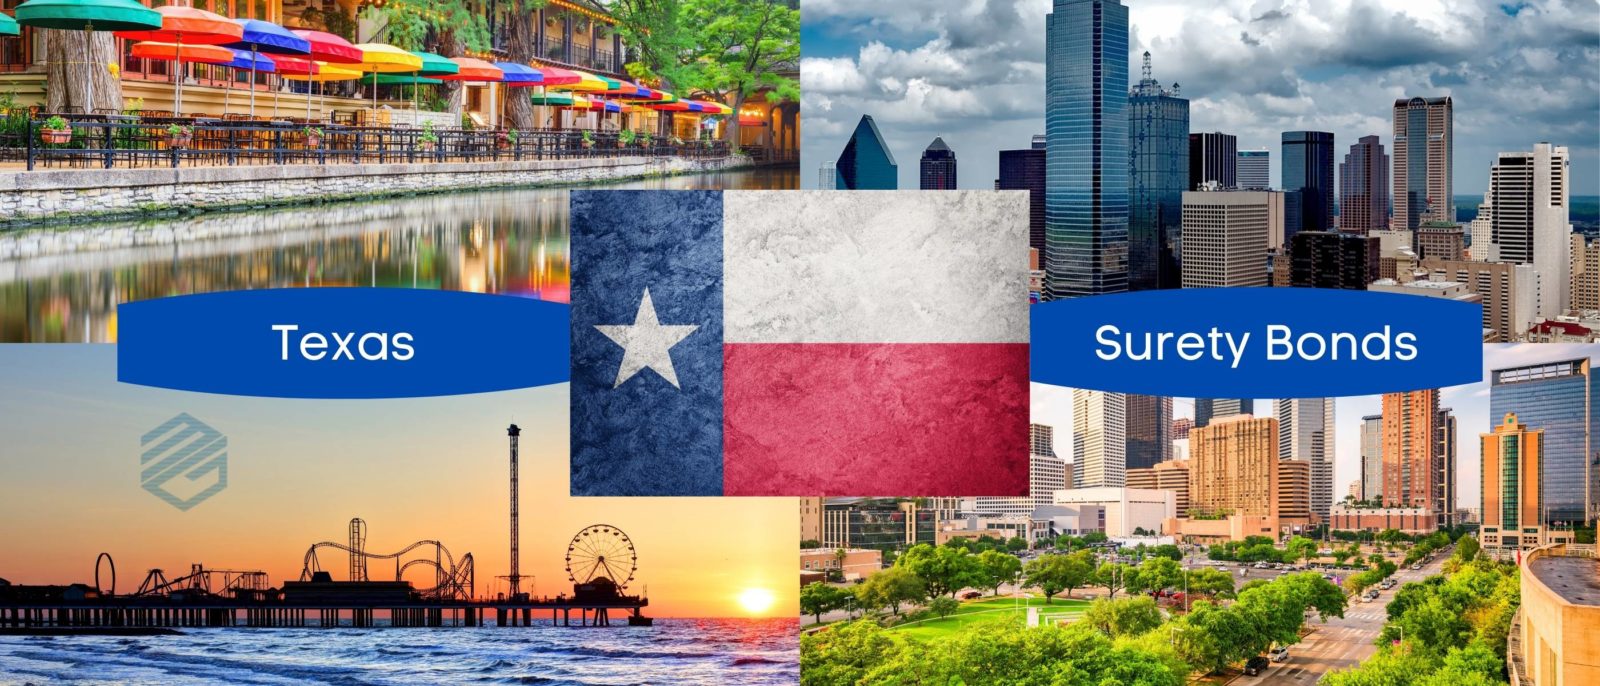 Texas Surety Bonds - Texas state flag in the middle with 4 pictures representing Texas including Galveston, Houston, Dallas and San Antonio. Two blue boxes read, "Texas Surety Bonds"